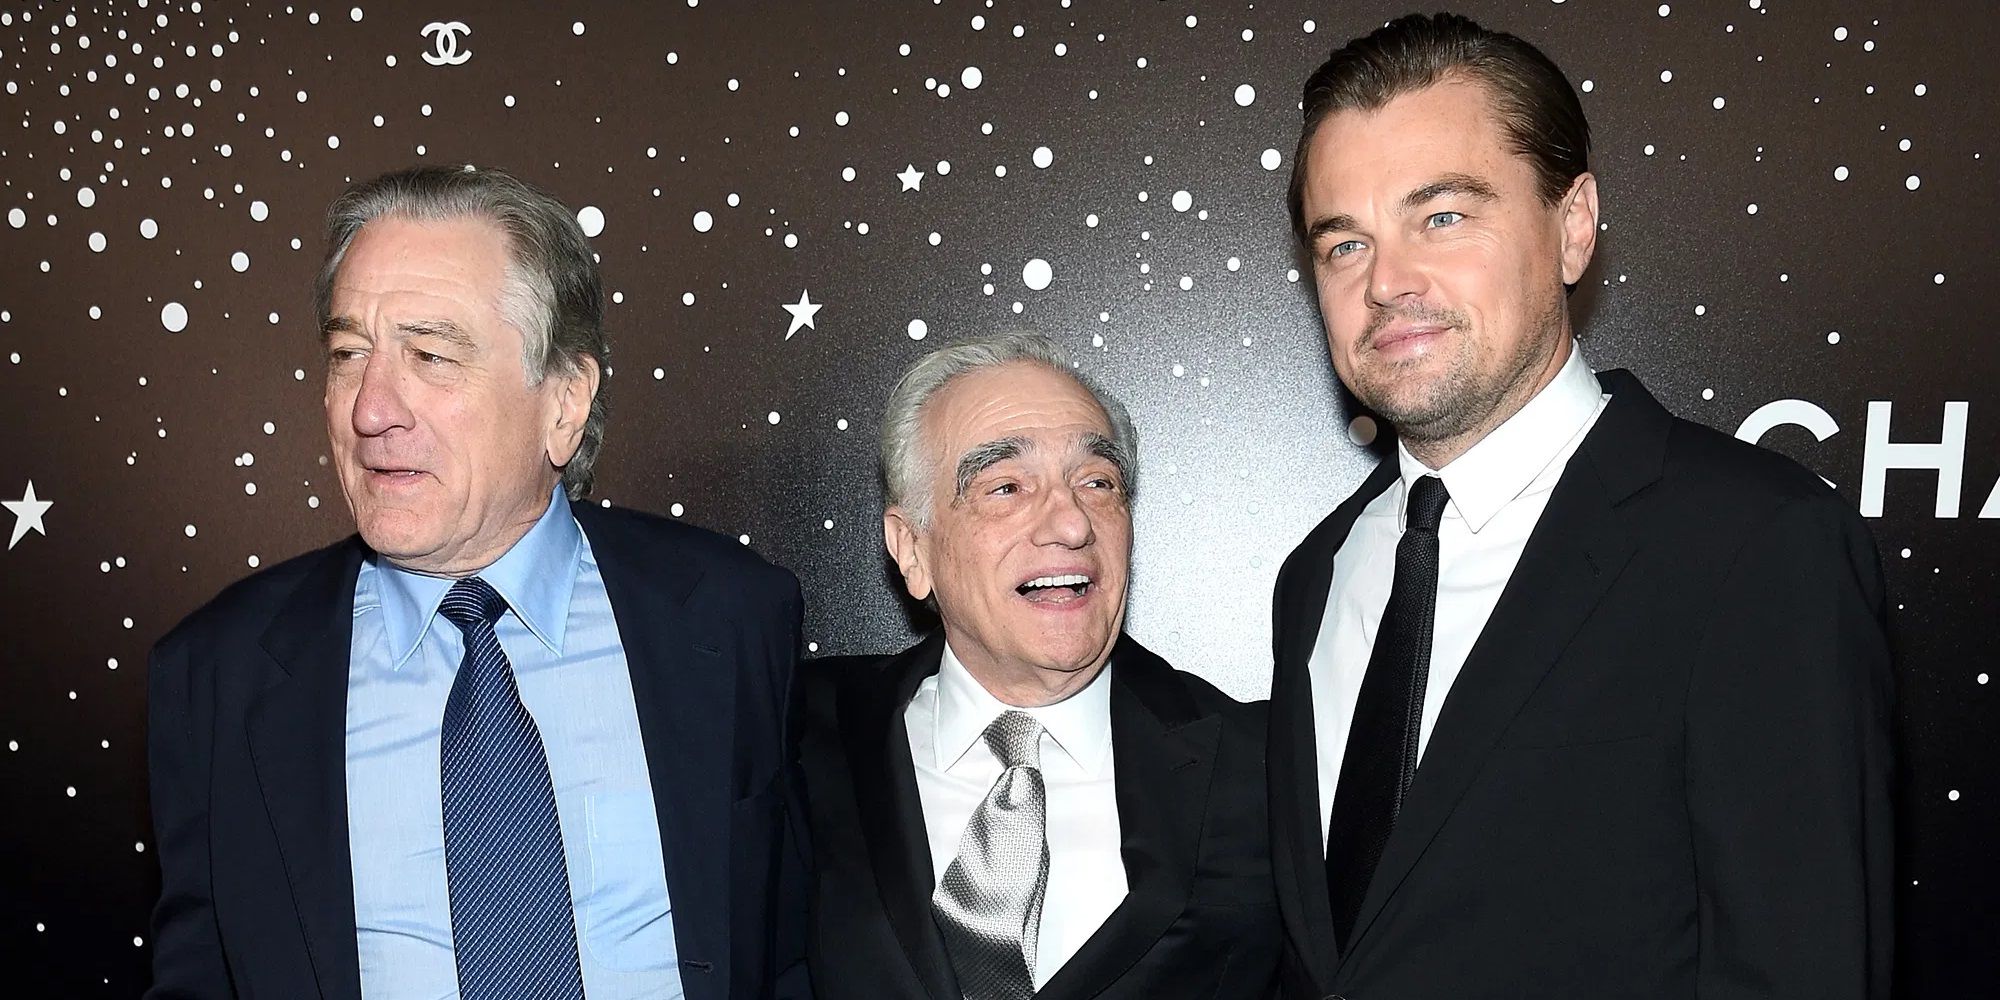 Killers Of The Flower Moon: 10 Things To Know About Martin Scorsese’s Next Movie